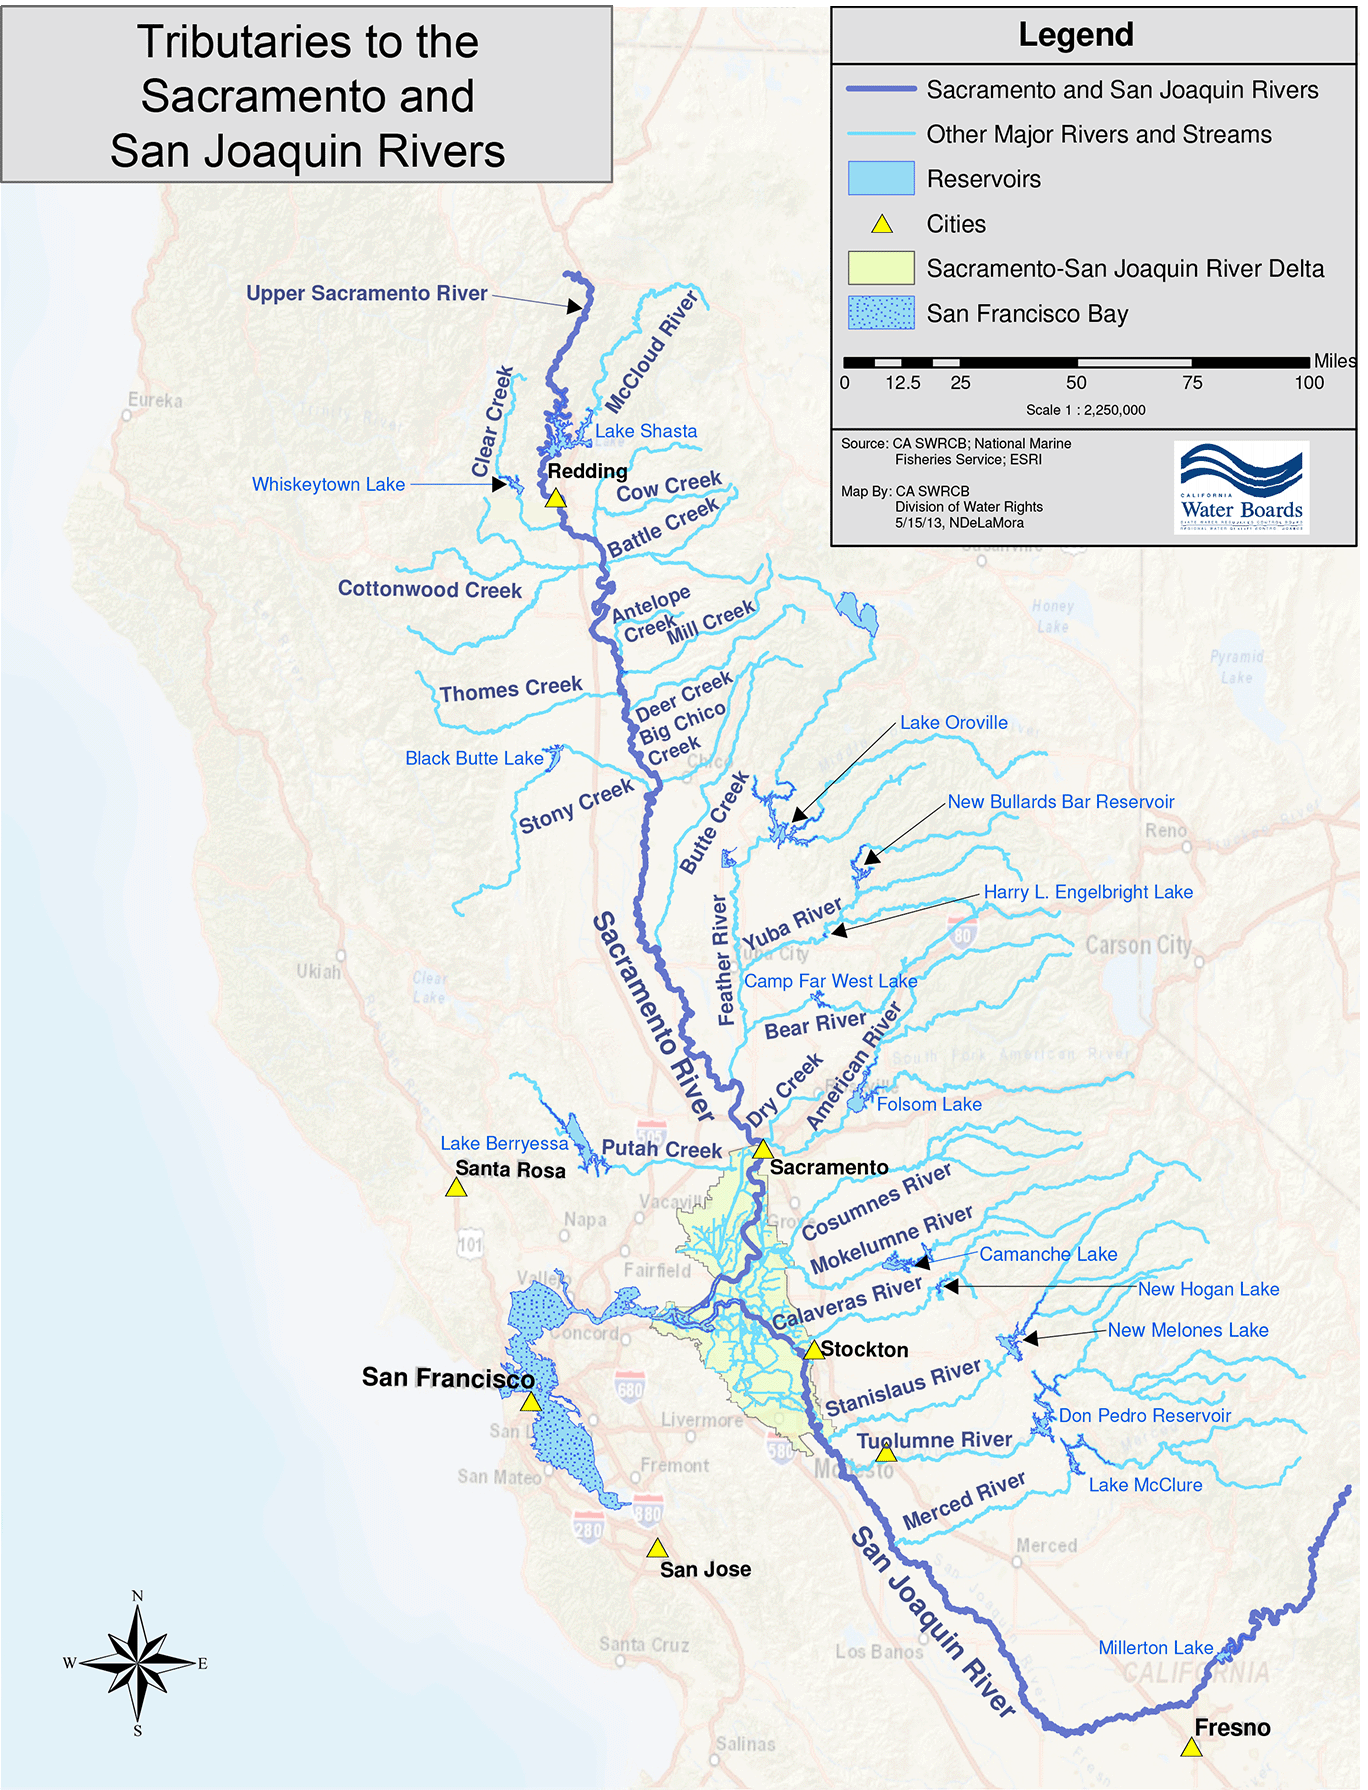 Two vast and distinct river systems join to form the Bay-Delta